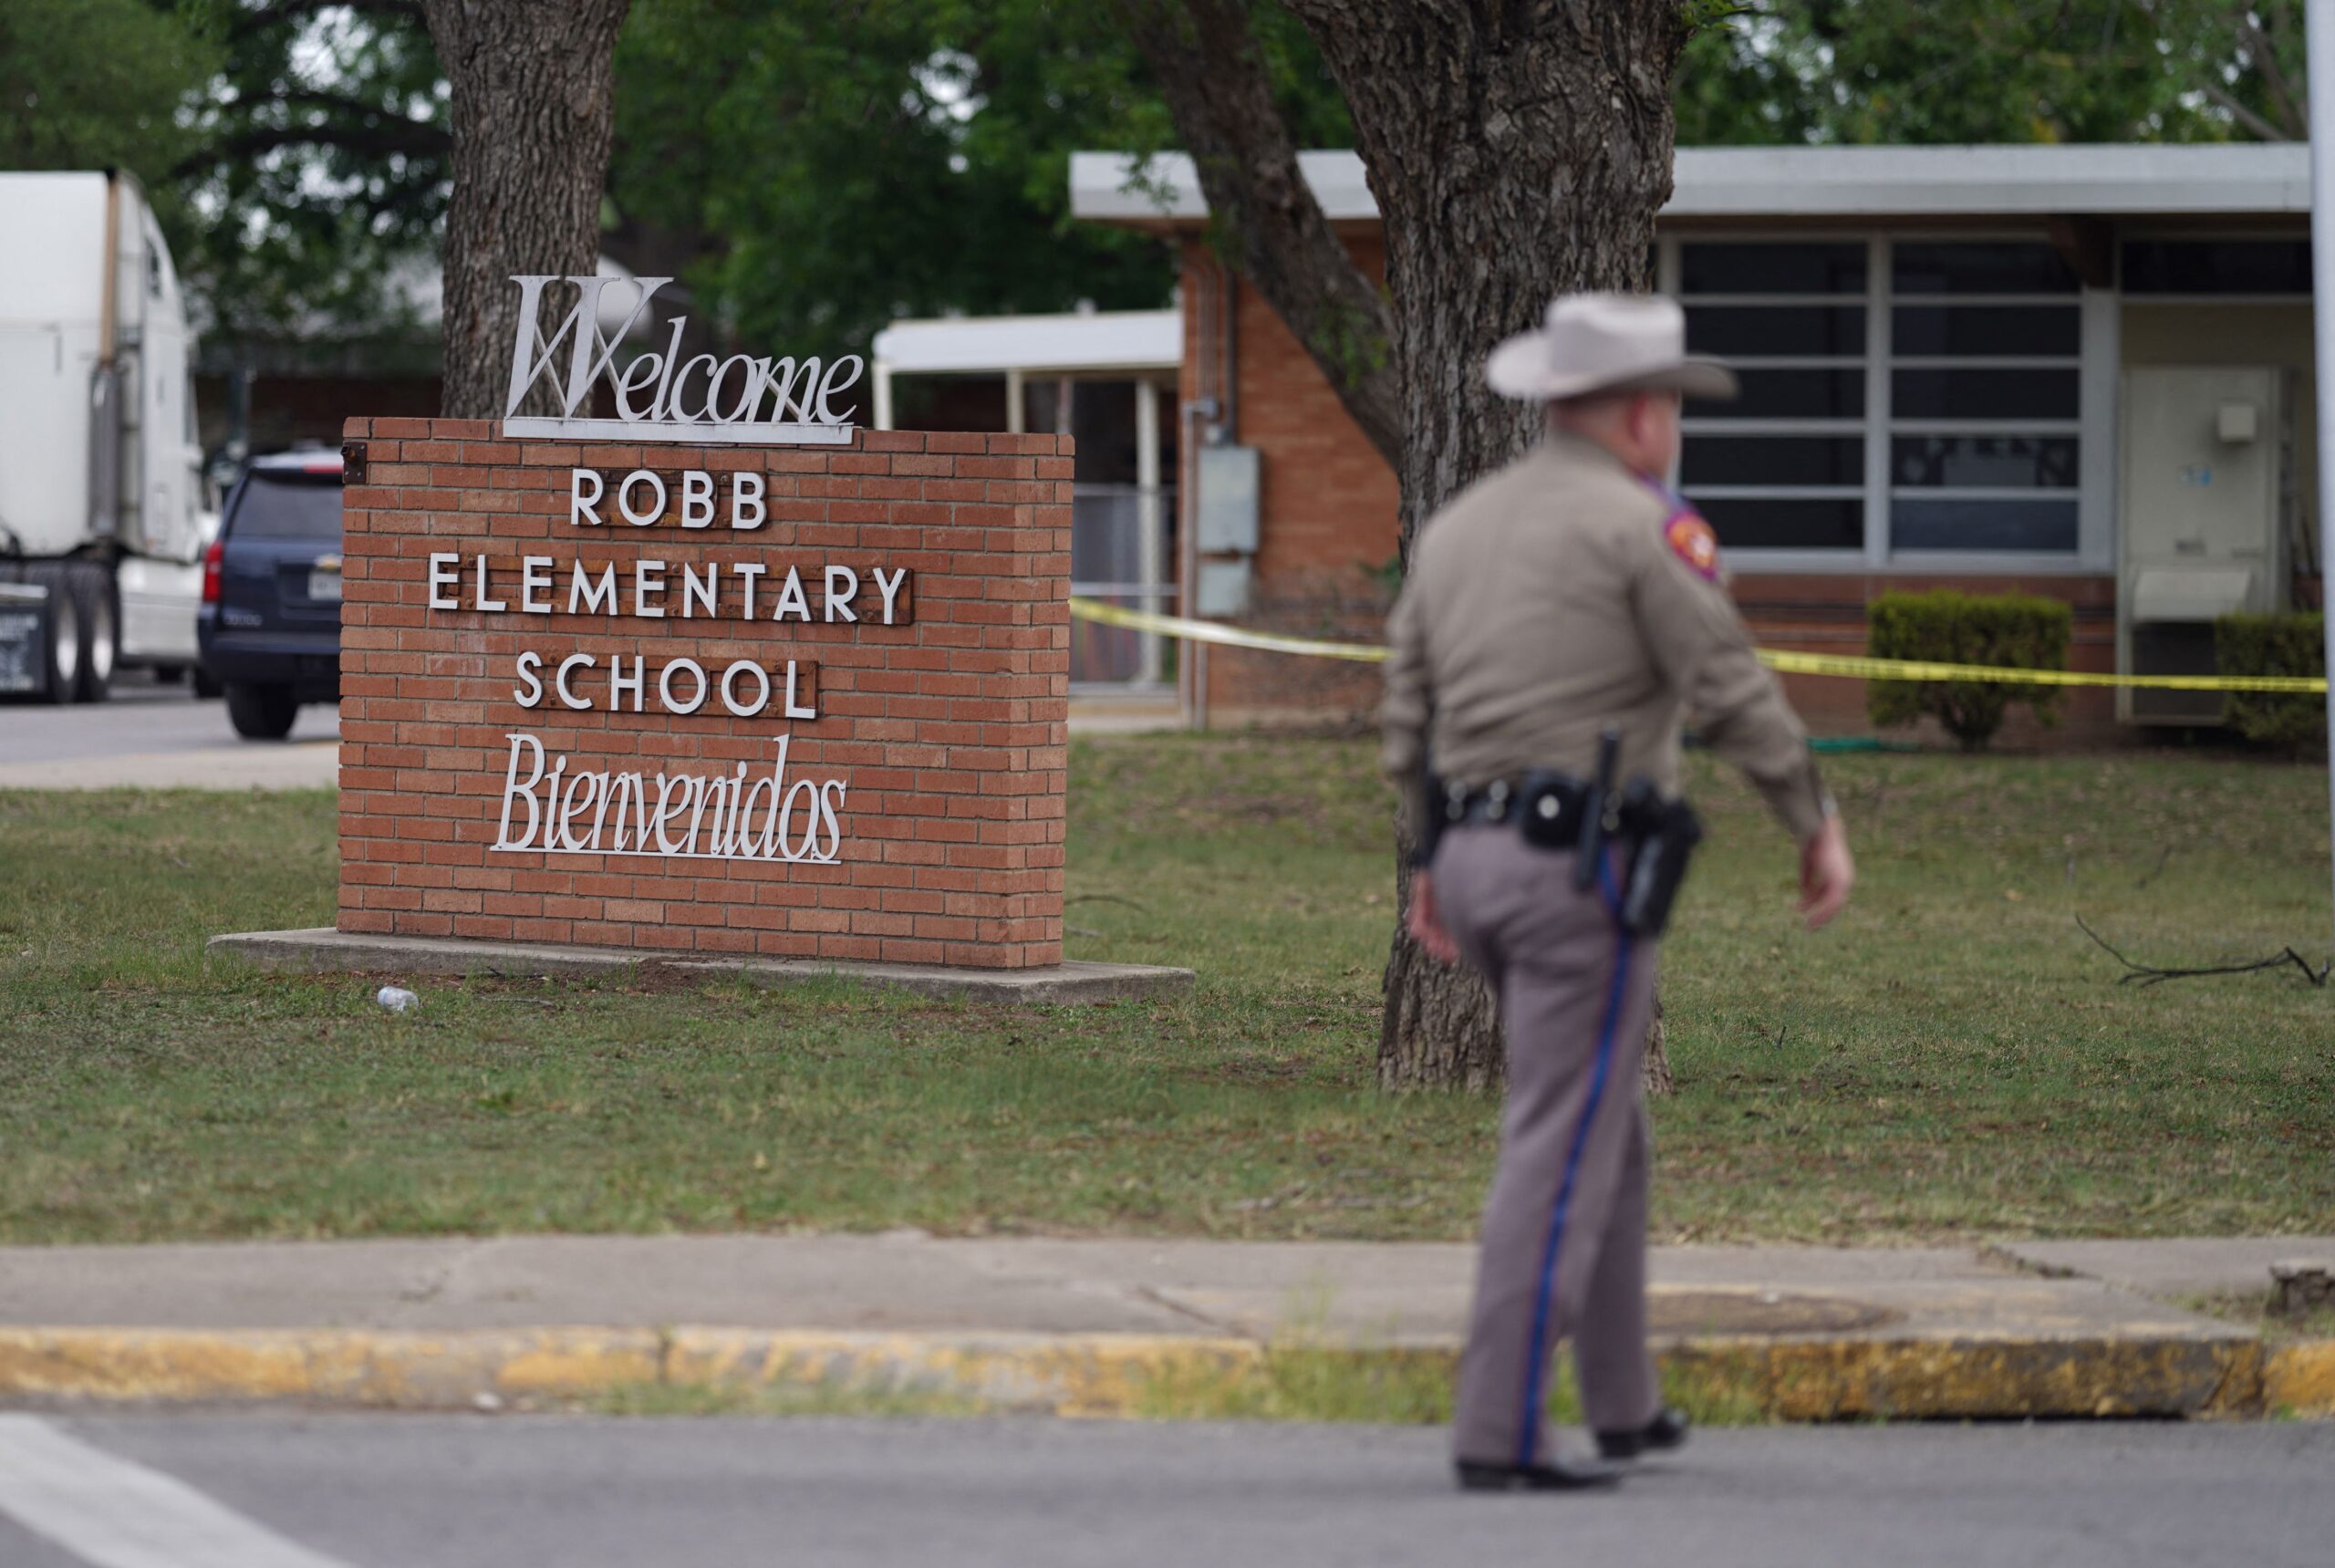 An officer walks outside of Robb Elementary School in Uvalde, Texas, on May 24, 2022. - An 18-year-old gunman killed 14 children and a teacher at an elementary school in Texas on Tuesday, according to the state's governor, in the nation's deadliest school shooting in years